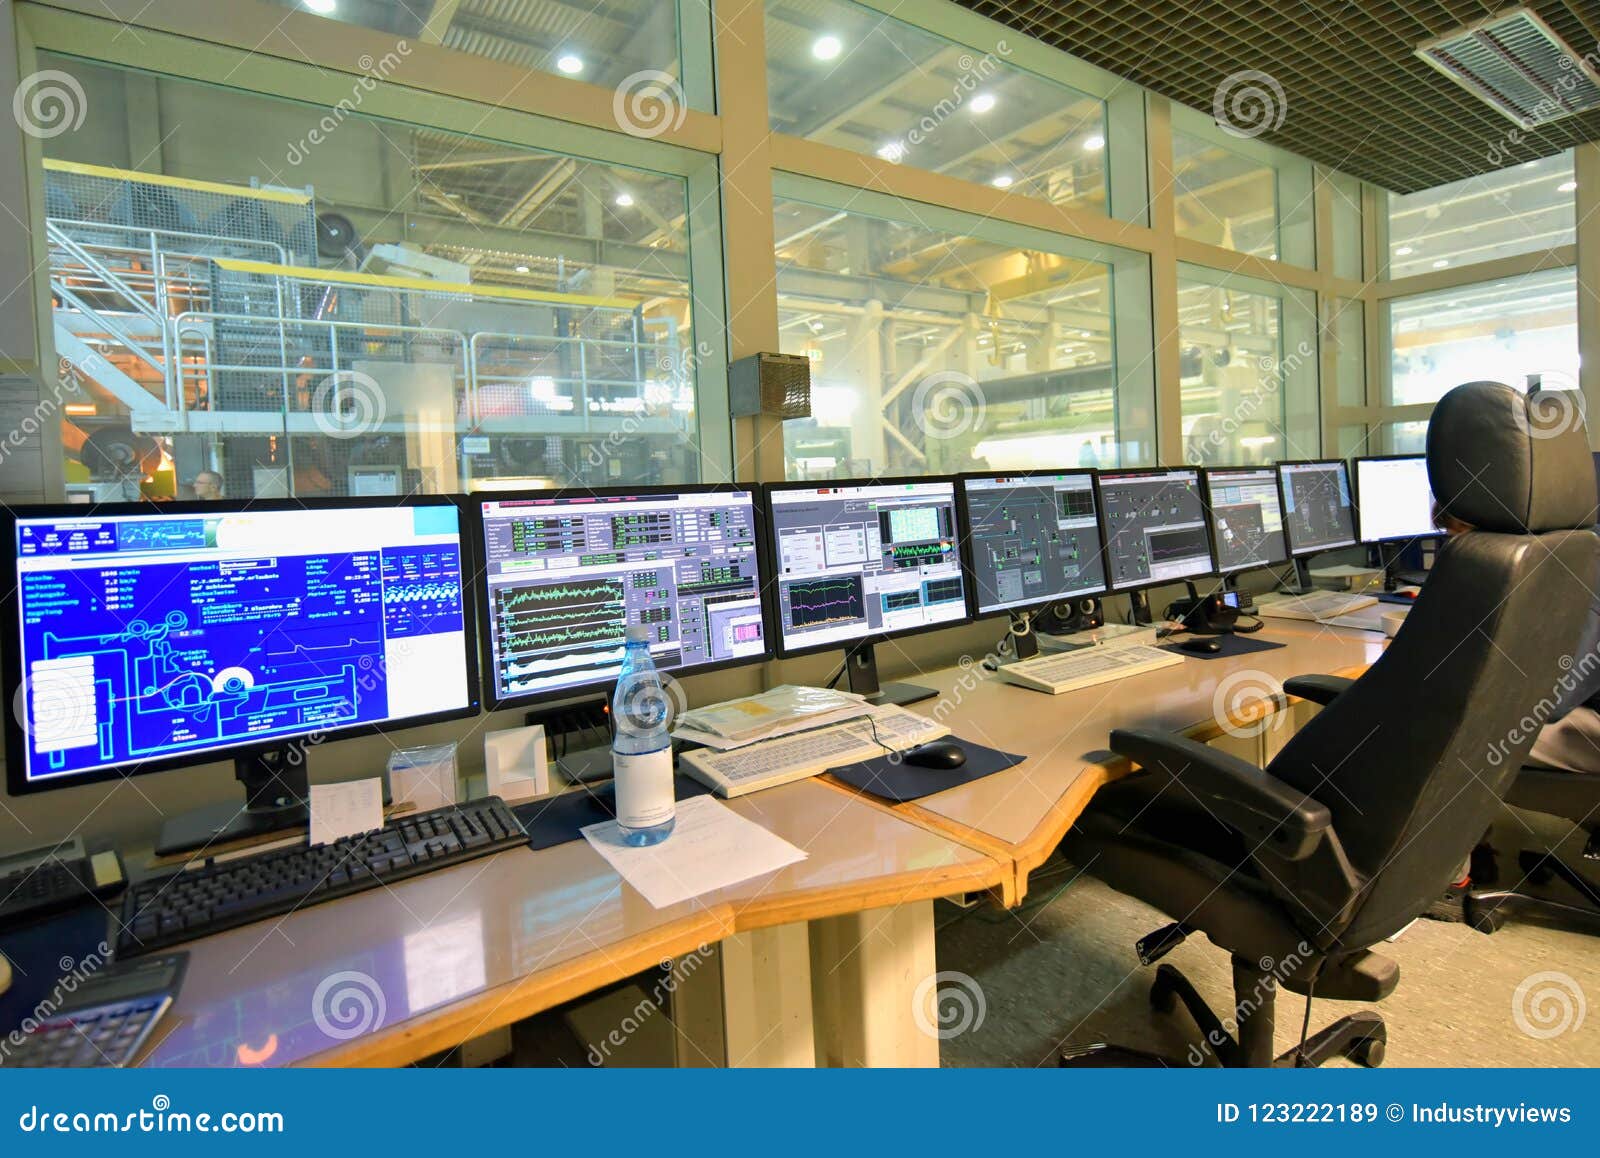 modern control centre with screens for monitoring and operating